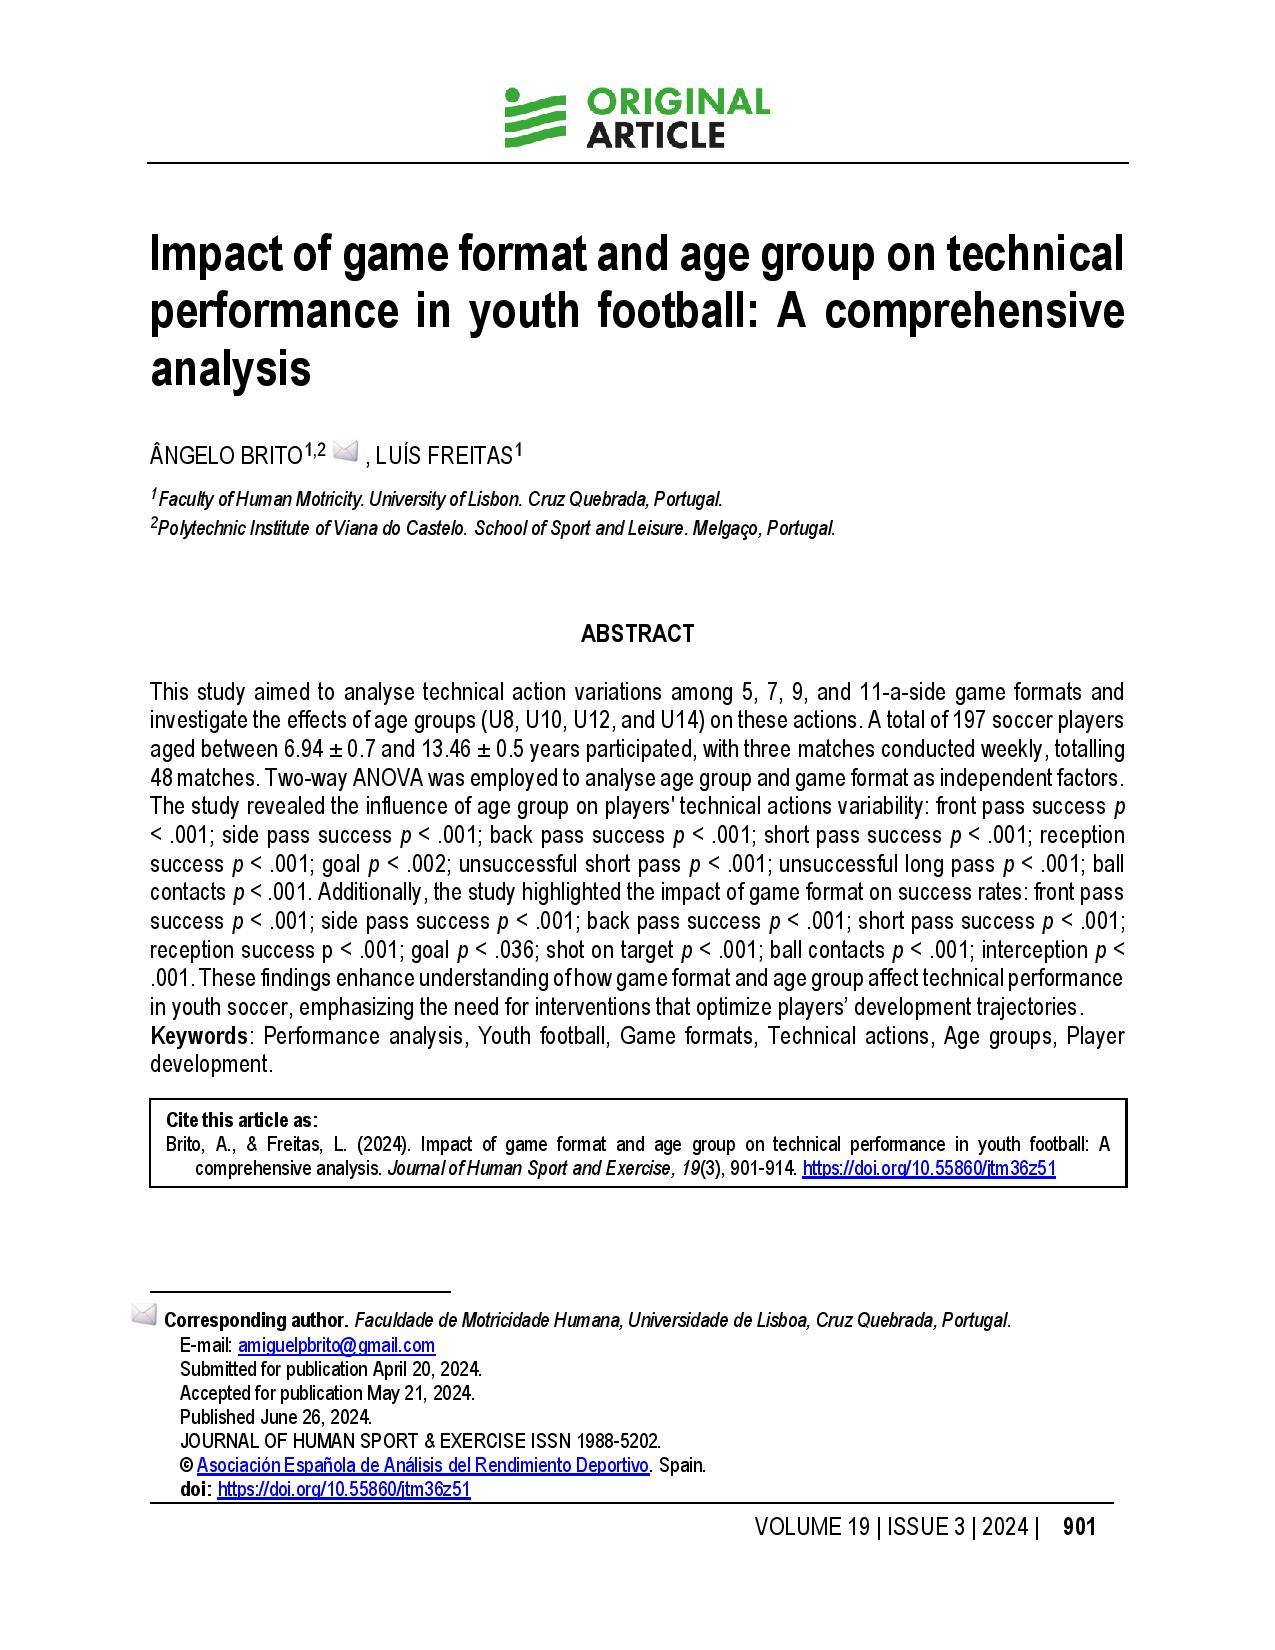 Impact of game format and age group on technical performance in youth football: A comprehensive analysis